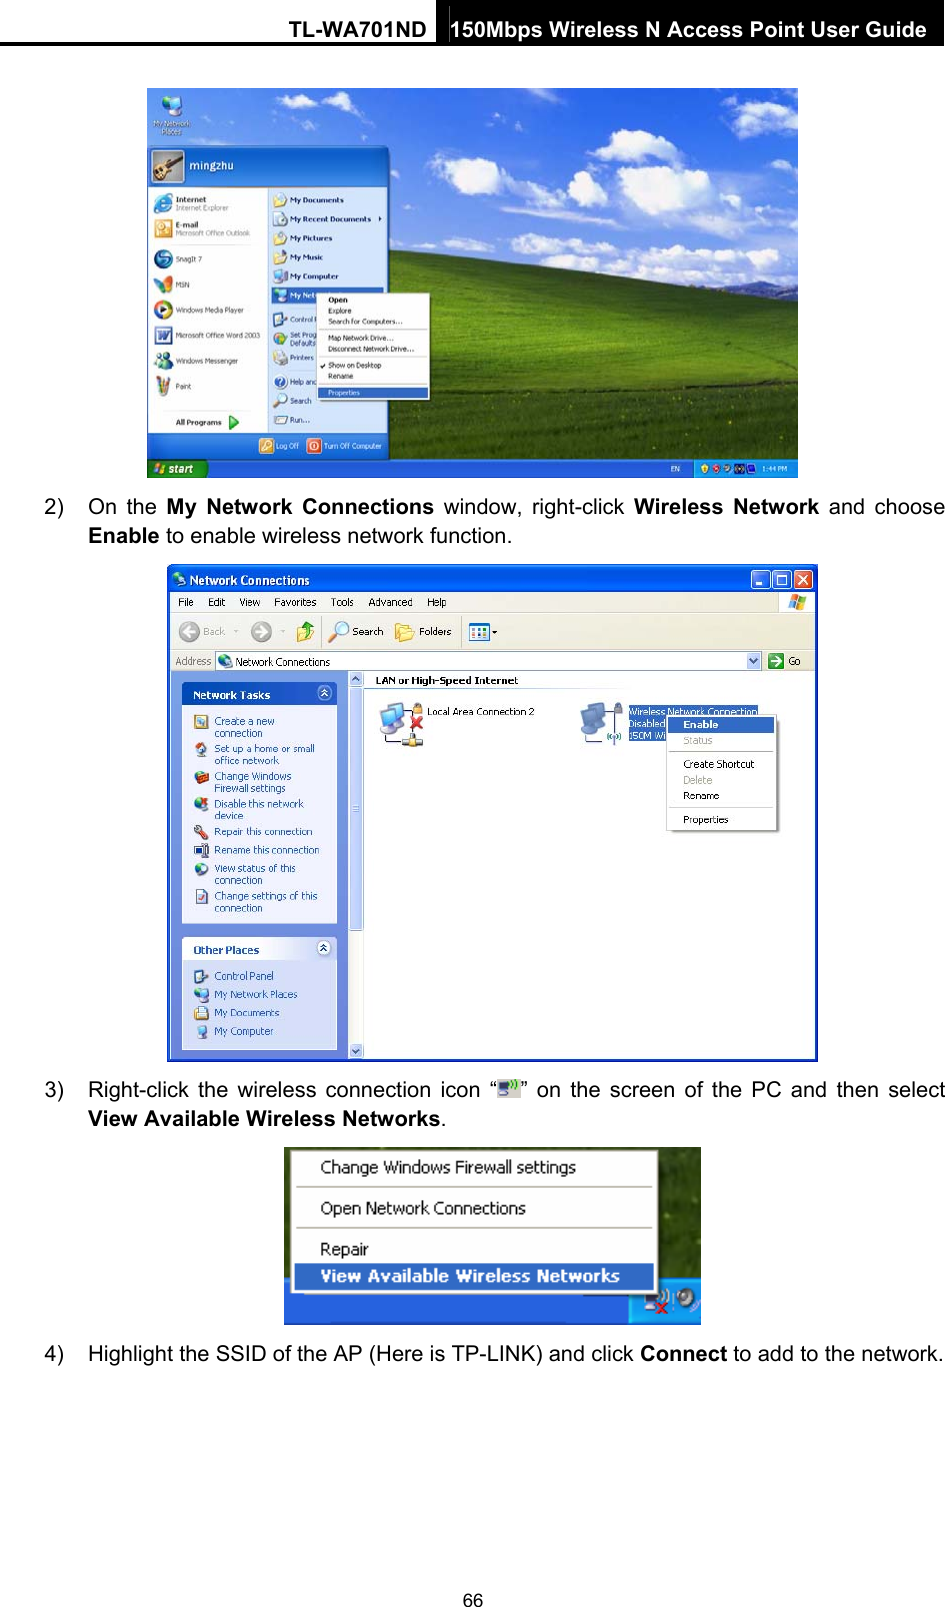 TL-WA701ND 150Mbps Wireless N Access Point User Guide  2) On the My Network Connections window, right-click Wireless Network and choose Enable to enable wireless network function.  3)  Right-click the wireless connection icon “ ” on the screen of the PC and then select View Available Wireless Networks.  4)  Highlight the SSID of the AP (Here is TP-LINK) and click Connect to add to the network. 66 